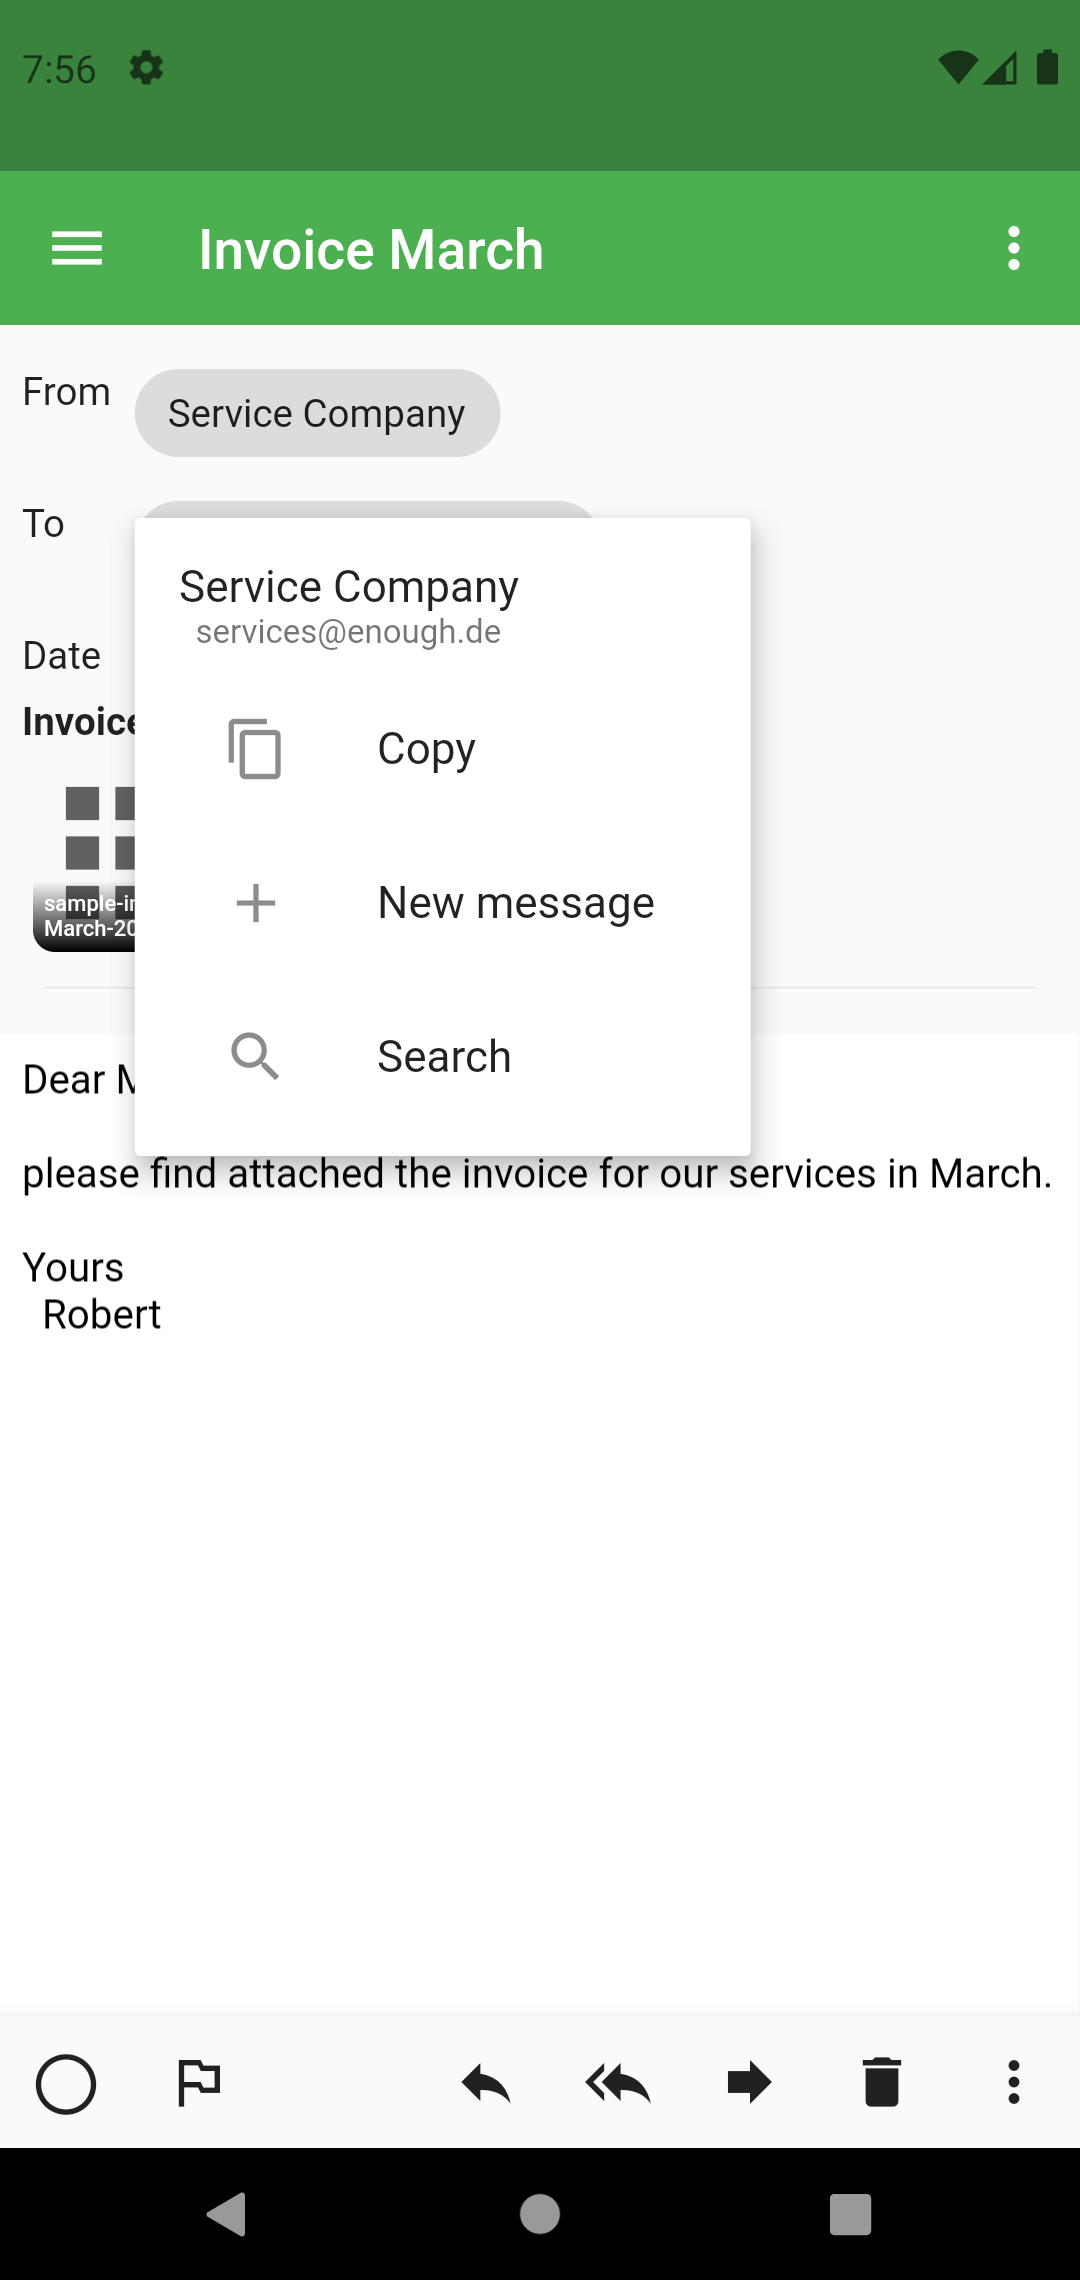 A Mail app for iOS and Android build in Flutter